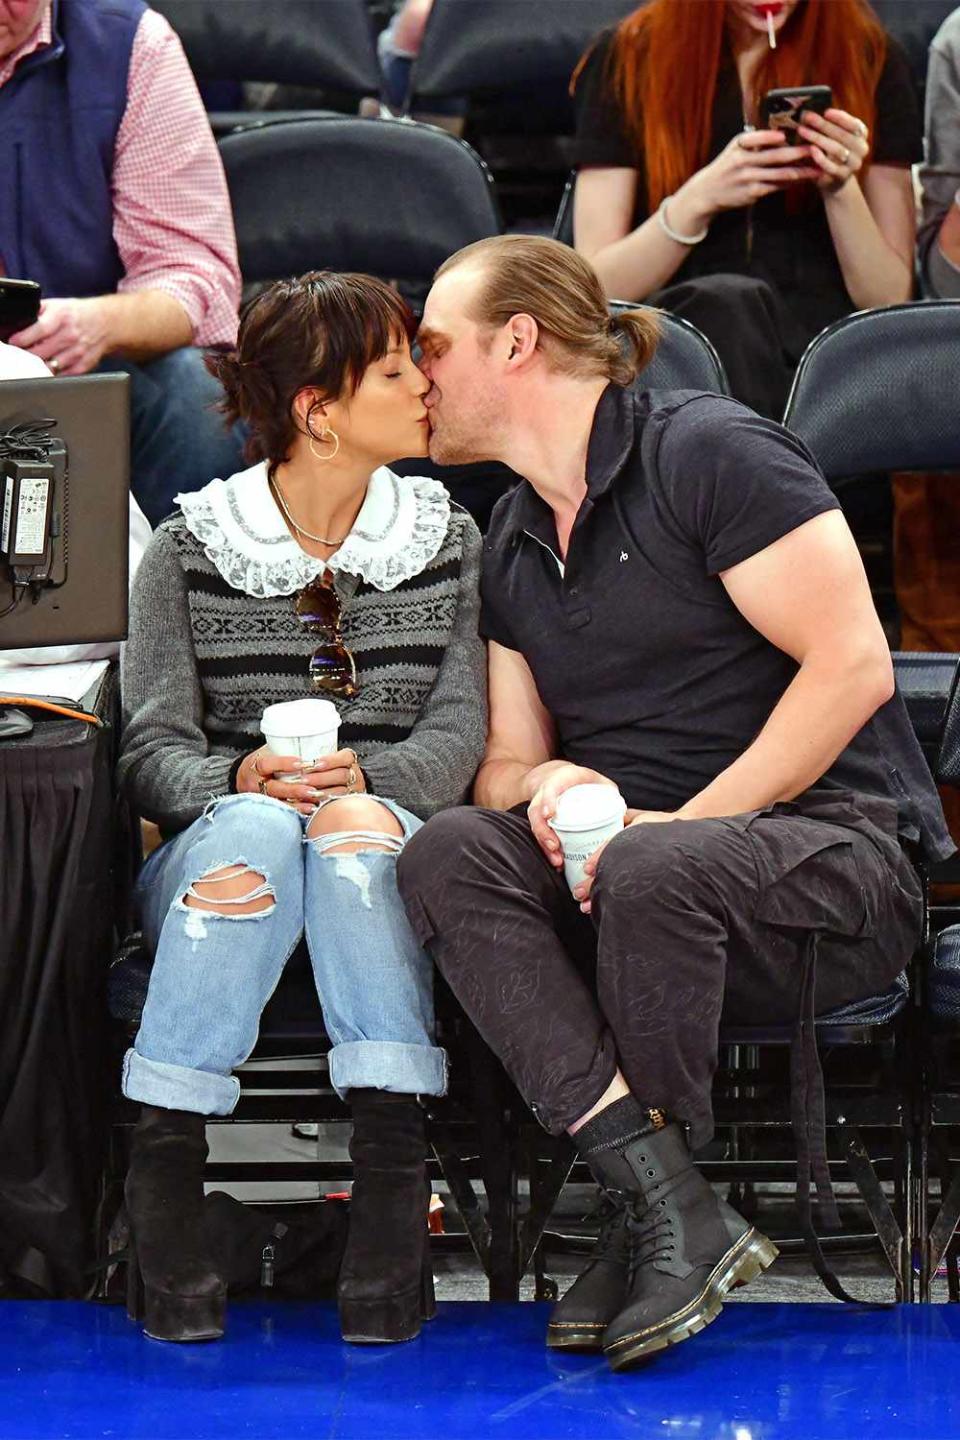 NEW YORK, NY - OCTOBER 18: Lily Allen and David Harbour attend New York Knicks v New Orleans Pelicans preseason game at Madison Square Garden on October 18, 2019 in New York City. (Photo by James Devaney/Getty Images)